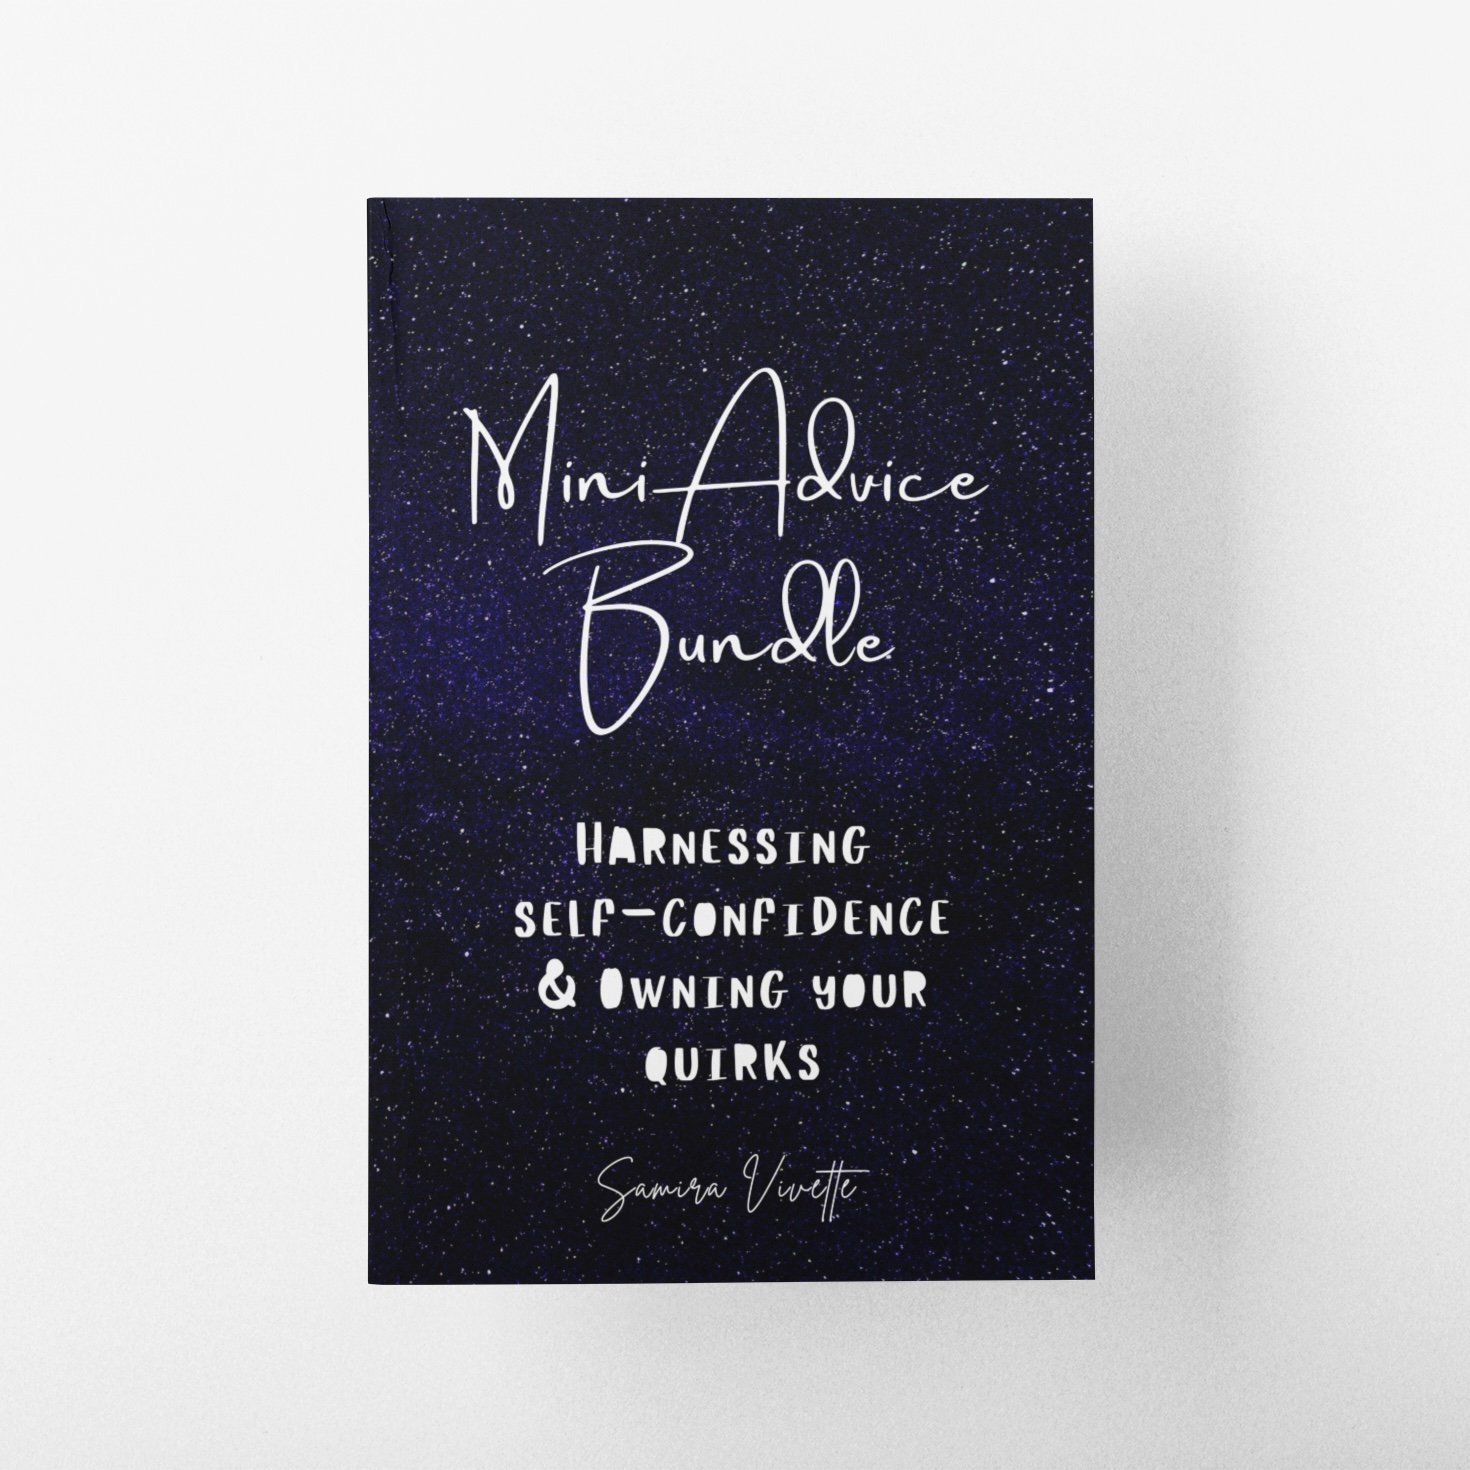 Mini Advice Bundle - Harnessing Self-Confidence and Owning Your Quirks